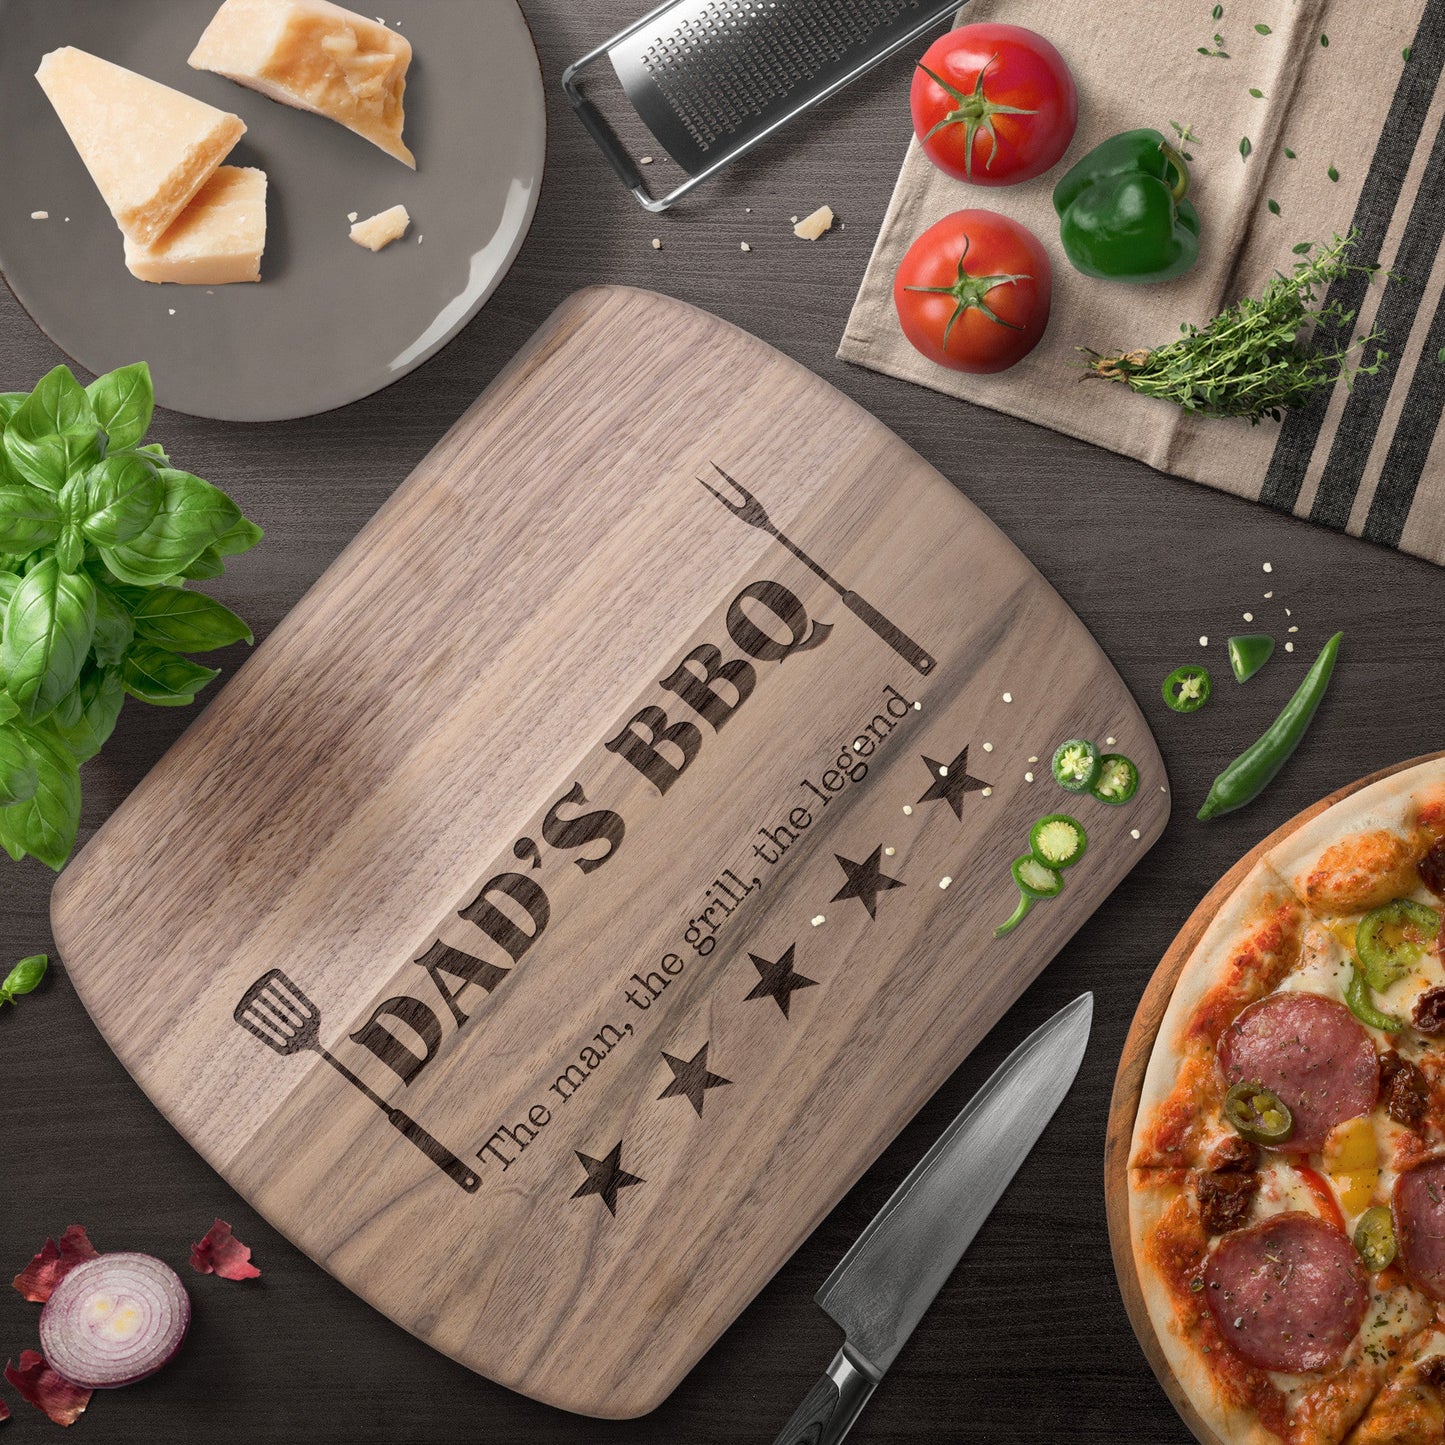 Get trendy with Dad's BBQ Cutting Board - Kitchenware available at Good Gift Company. Grab yours for $18.50 today!